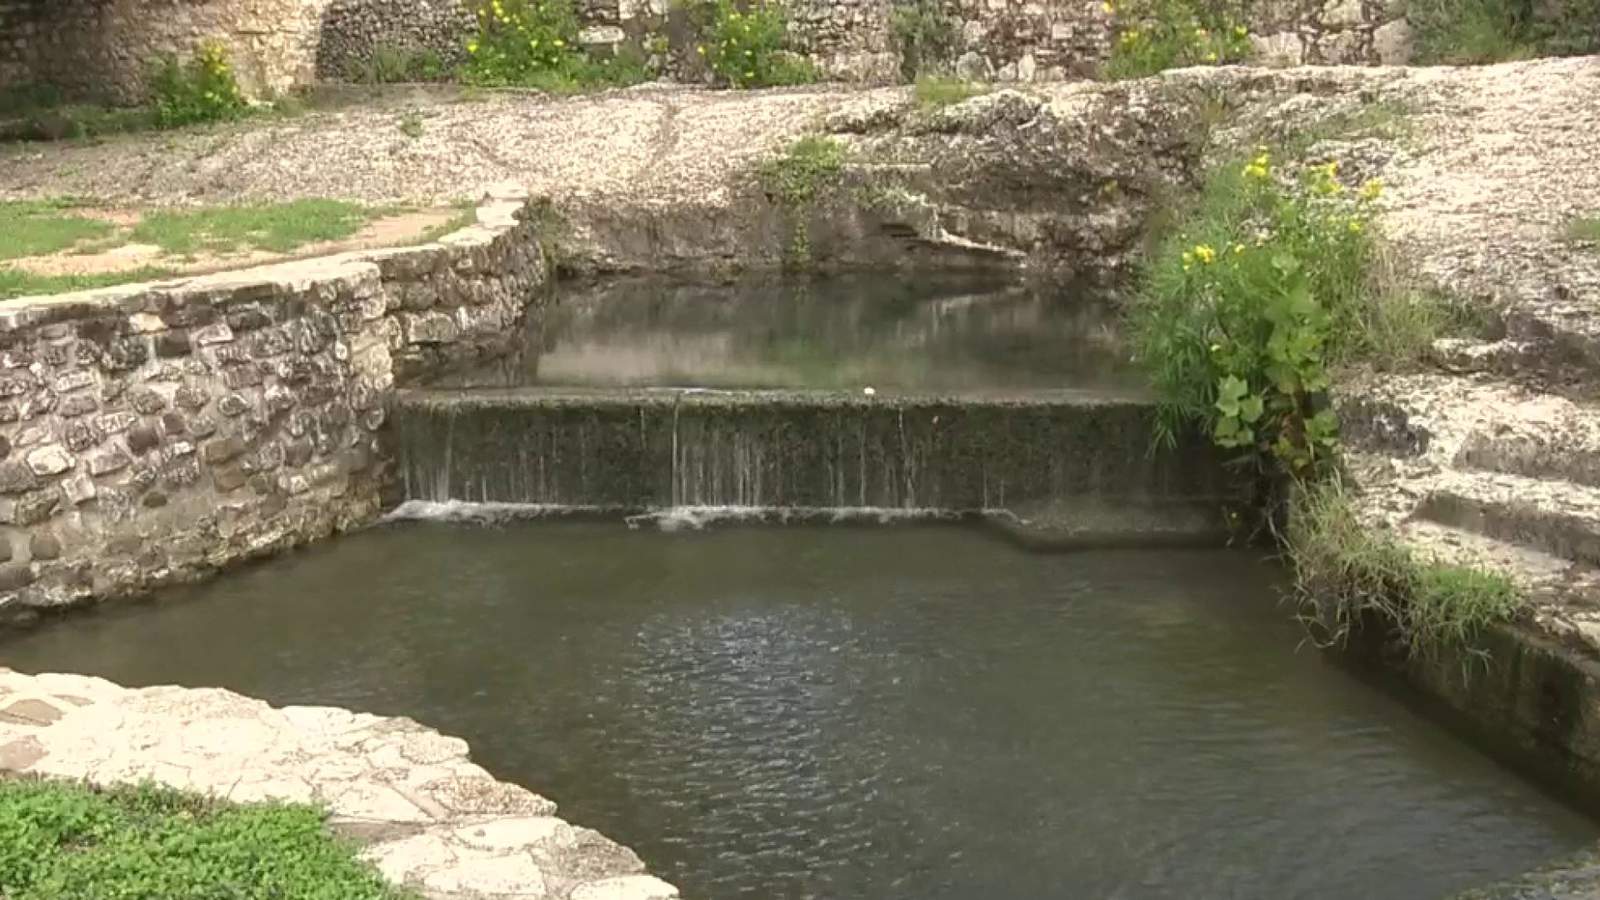 Edwards Aquifer Conservancy launches research program to help better protect water quality for millions of people - KSAT San Antonio